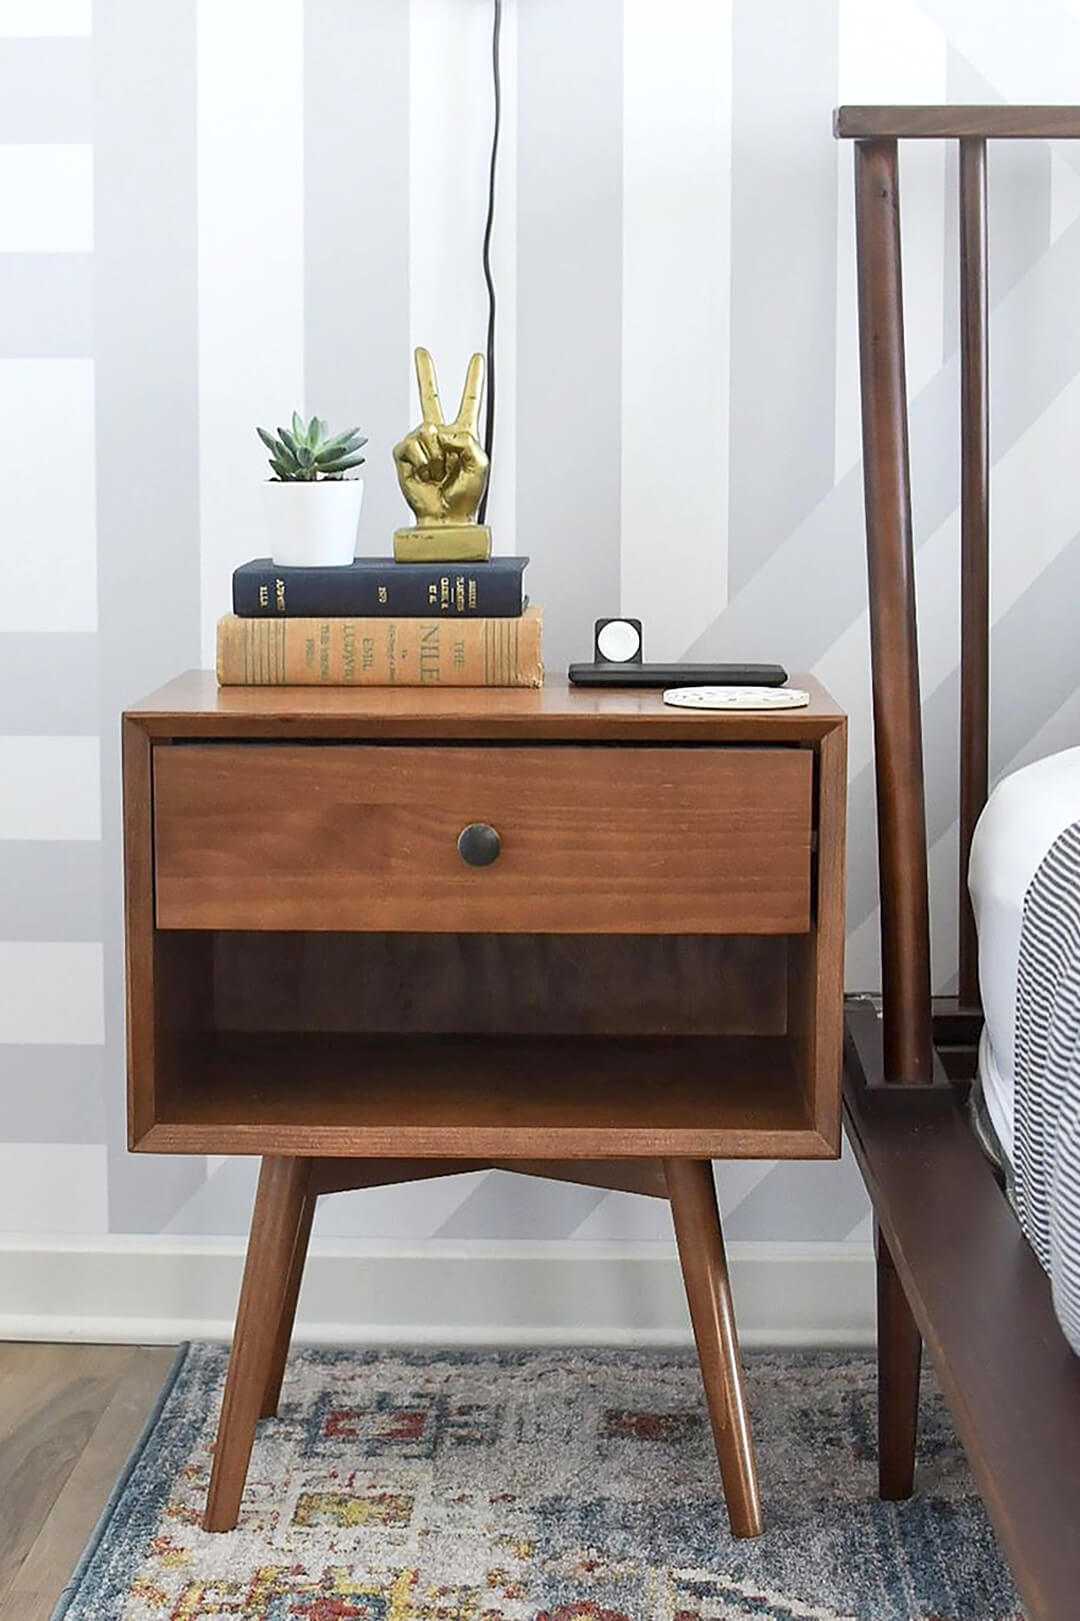 Mid century modern bedroom with dark wood nightstand, vintage books, light bed linen and black industrial wall sconces